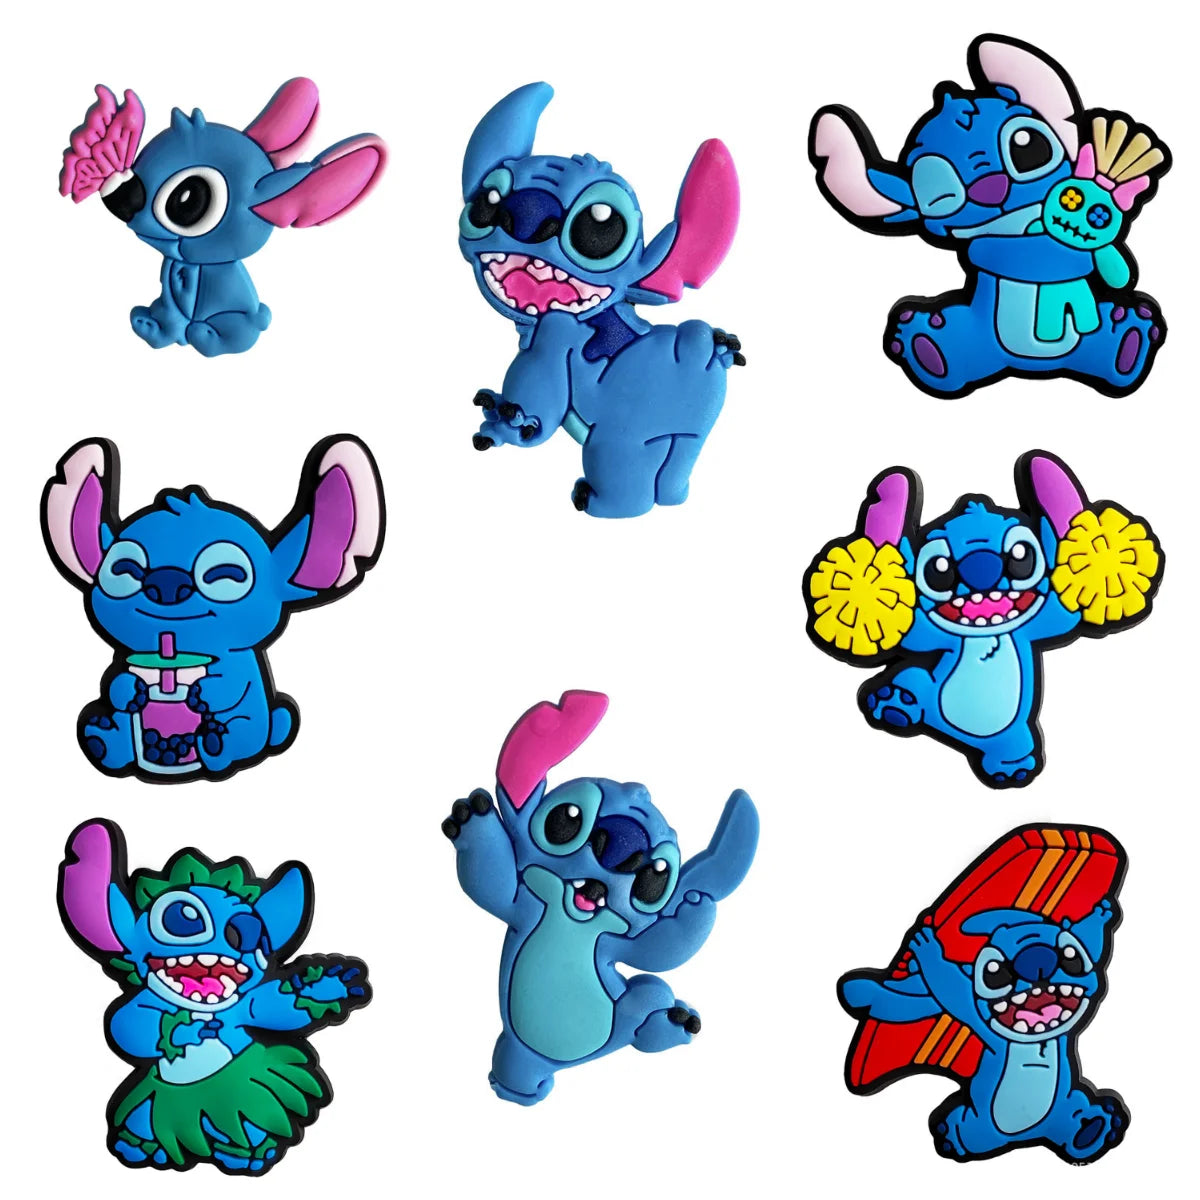 Disney Series Shoes Charms PVC Cartoon Mickey Stitch Shoe Accessories For Clogs Sandals Decoration Buckle Kids Friends Gifts 8PCS 4 - ihavepaws.com